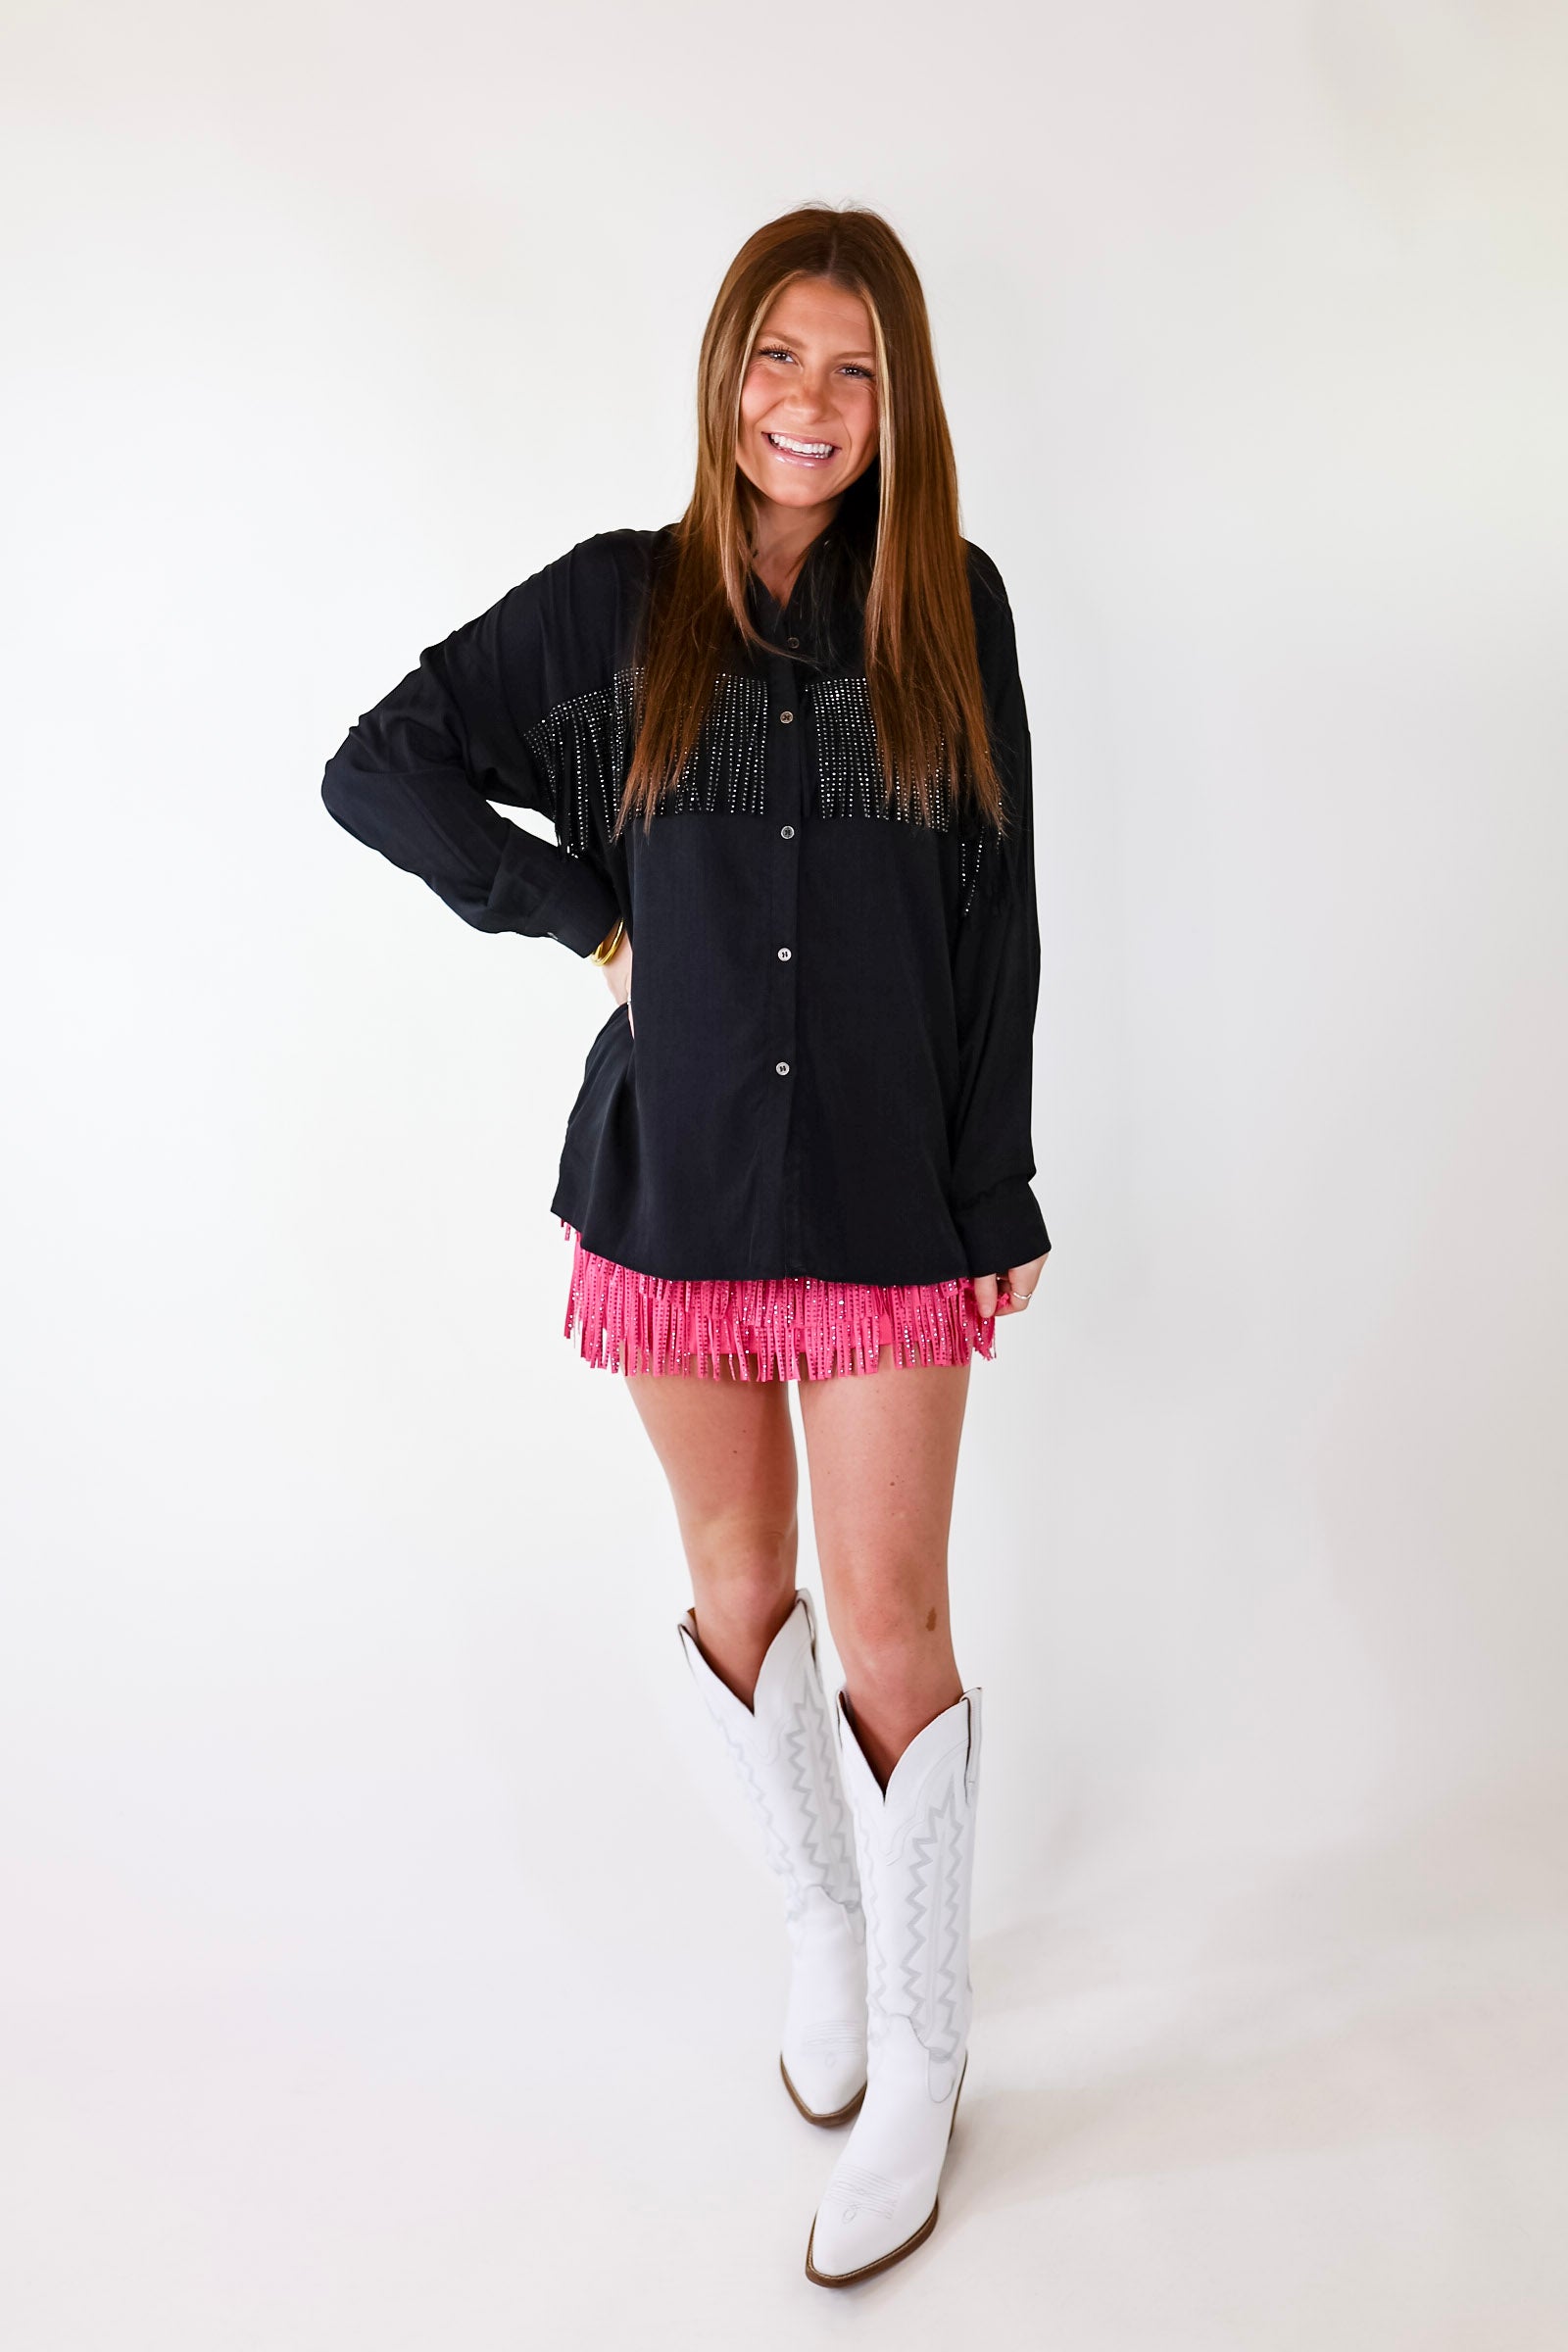 All That Shimmers Crystal Fringe Button Up Top with Long Sleeves in Black - Giddy Up Glamour Boutique